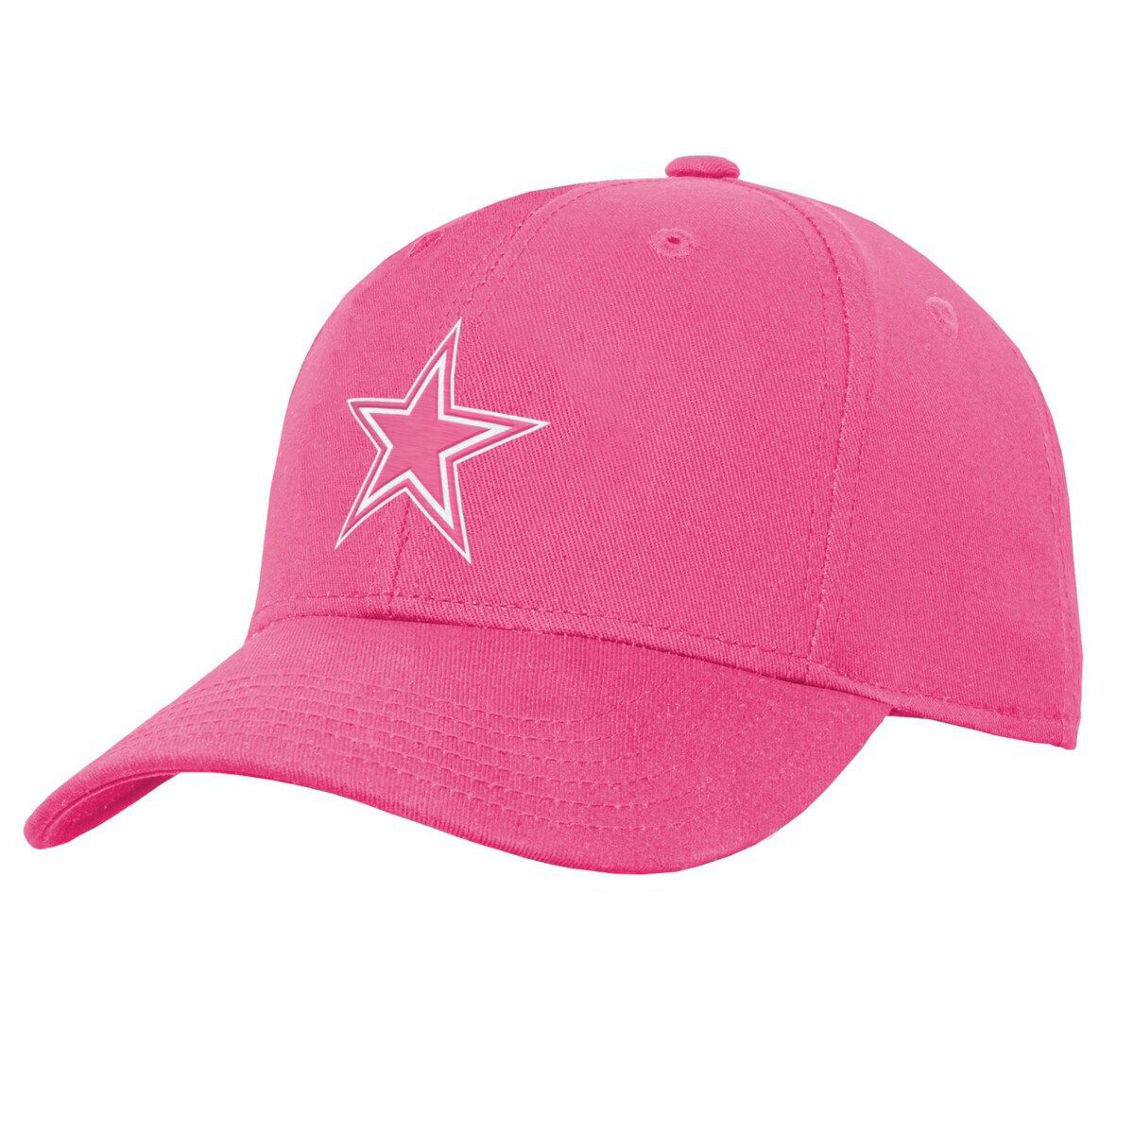 Outerstuff Girls Youth Pink Dallas Cowboys Adjustable Hat - Image 2 of 4